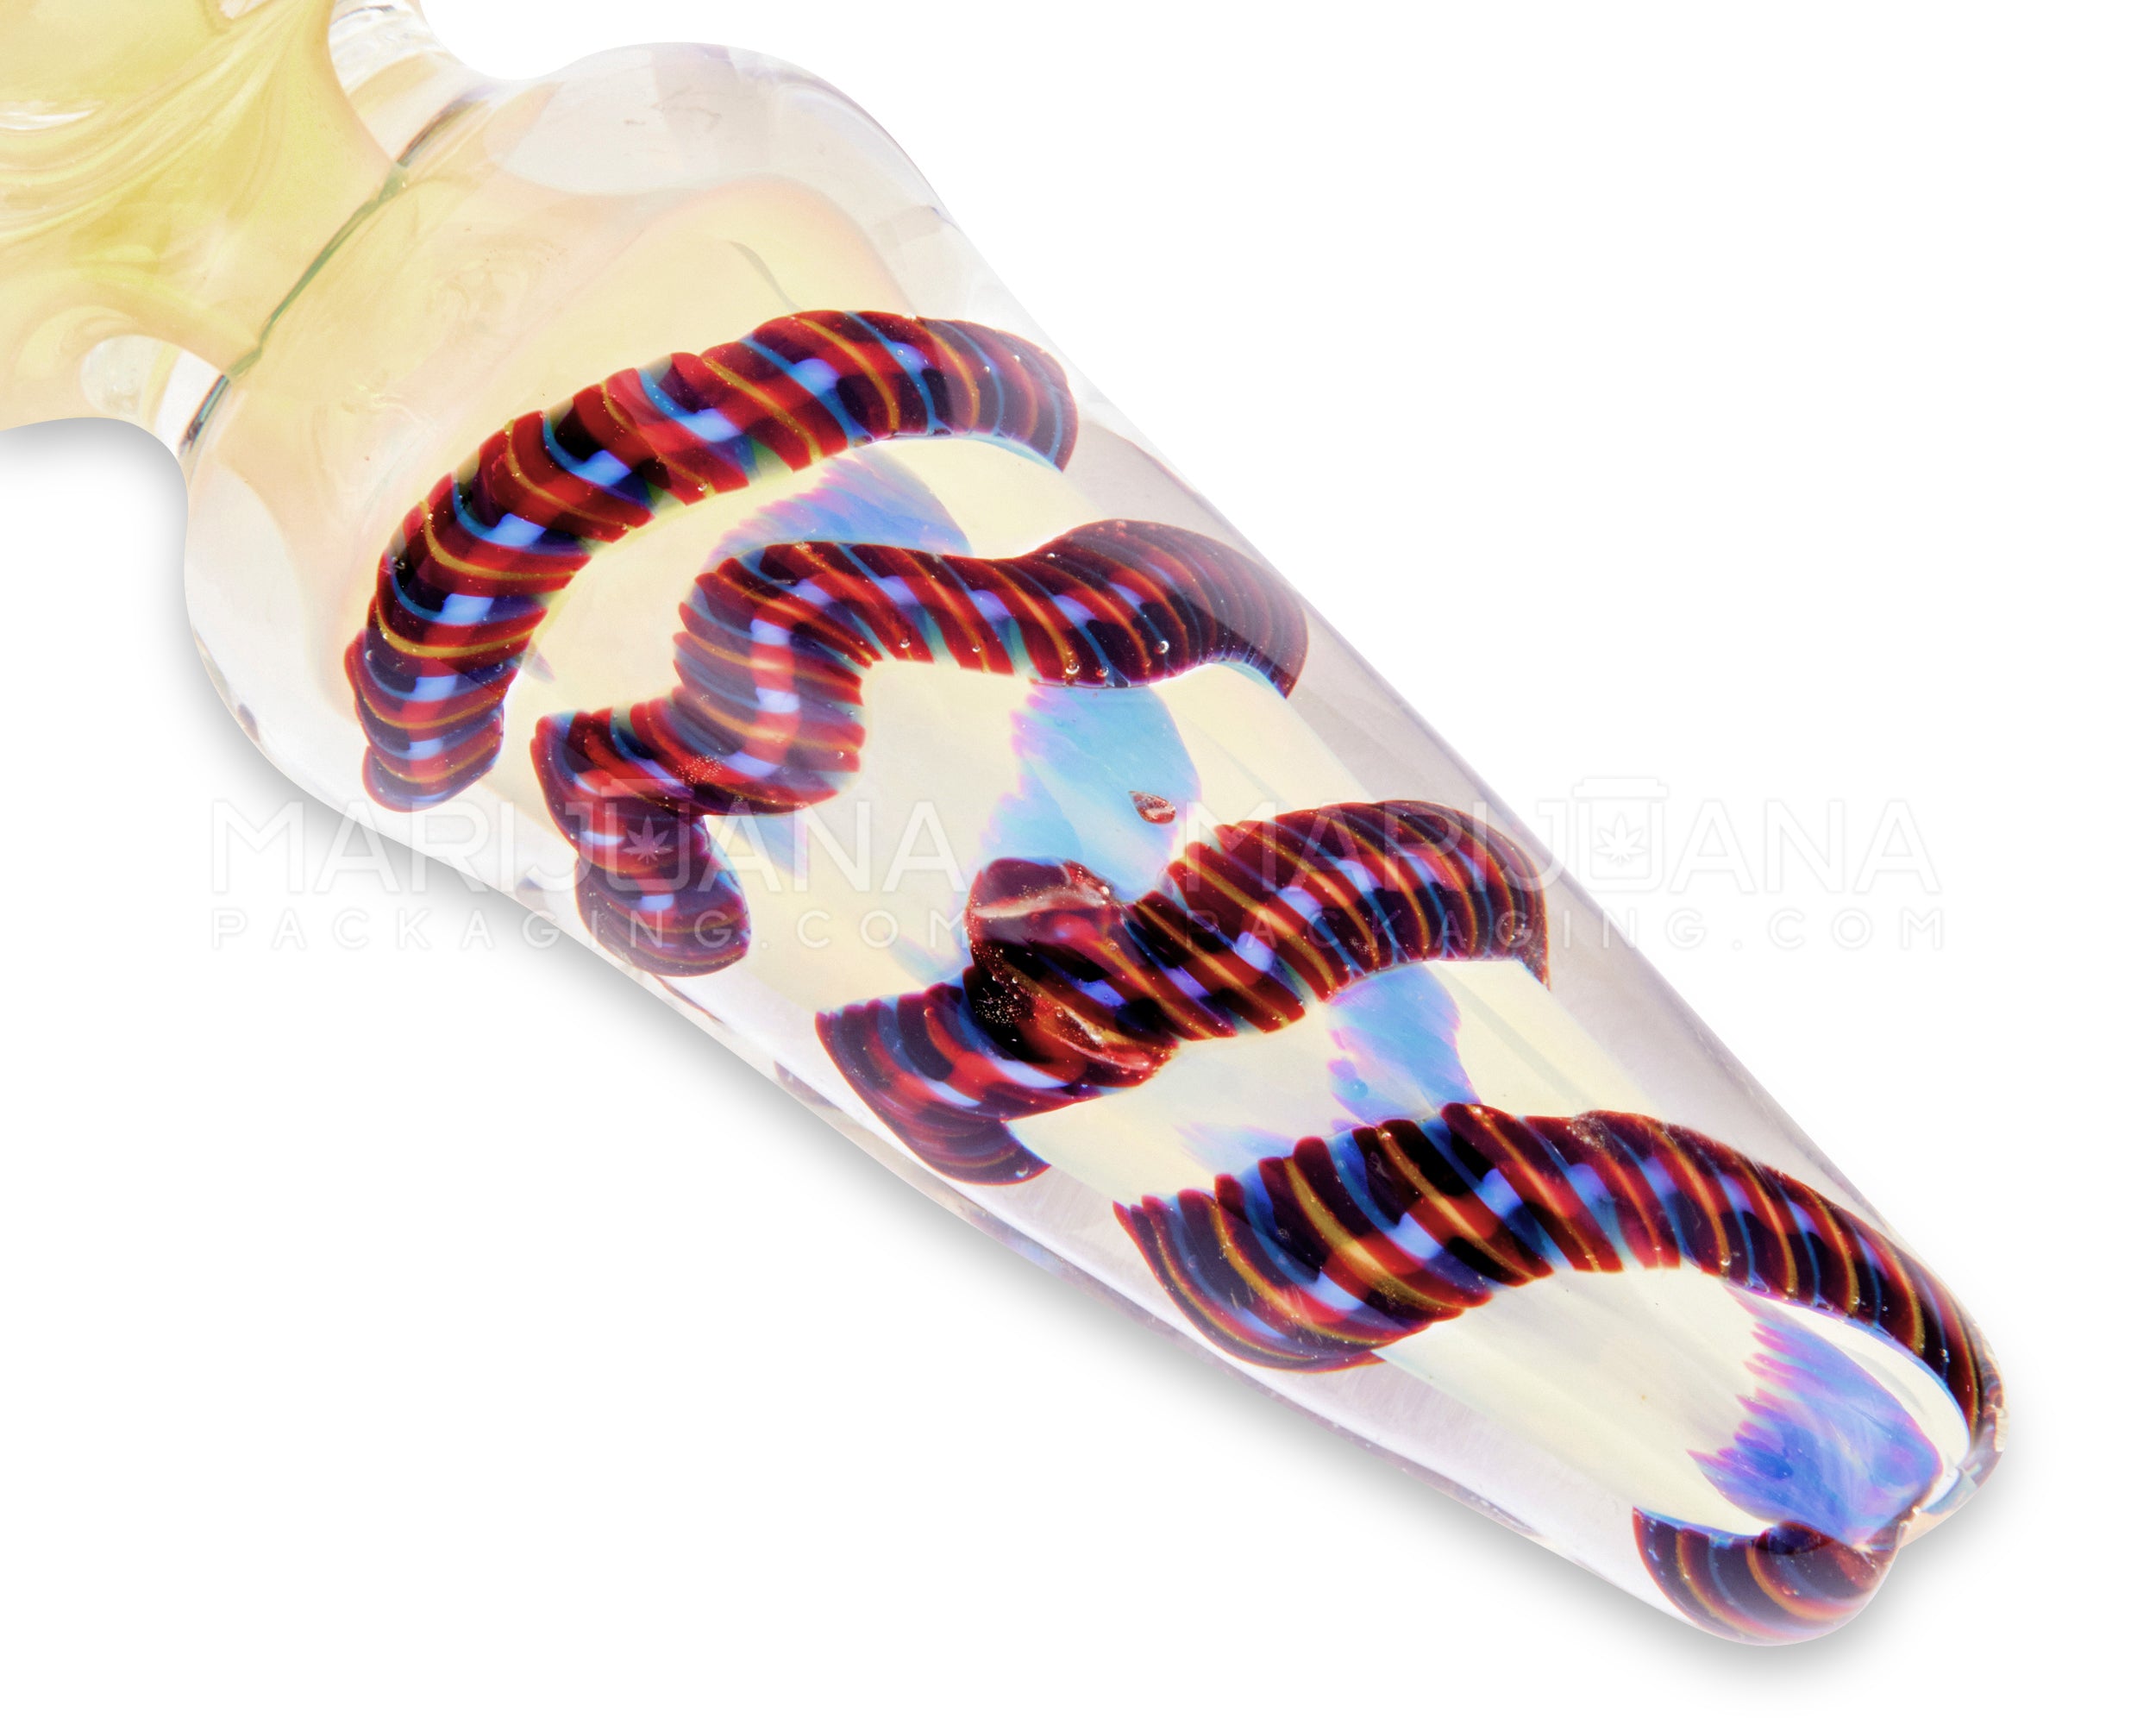 Bubble Trap & Fumed Bulged Conical Spoon Hand Pipe w/ Knocker & Ribboning | 4.5in Long - Glass - Assorted - 3